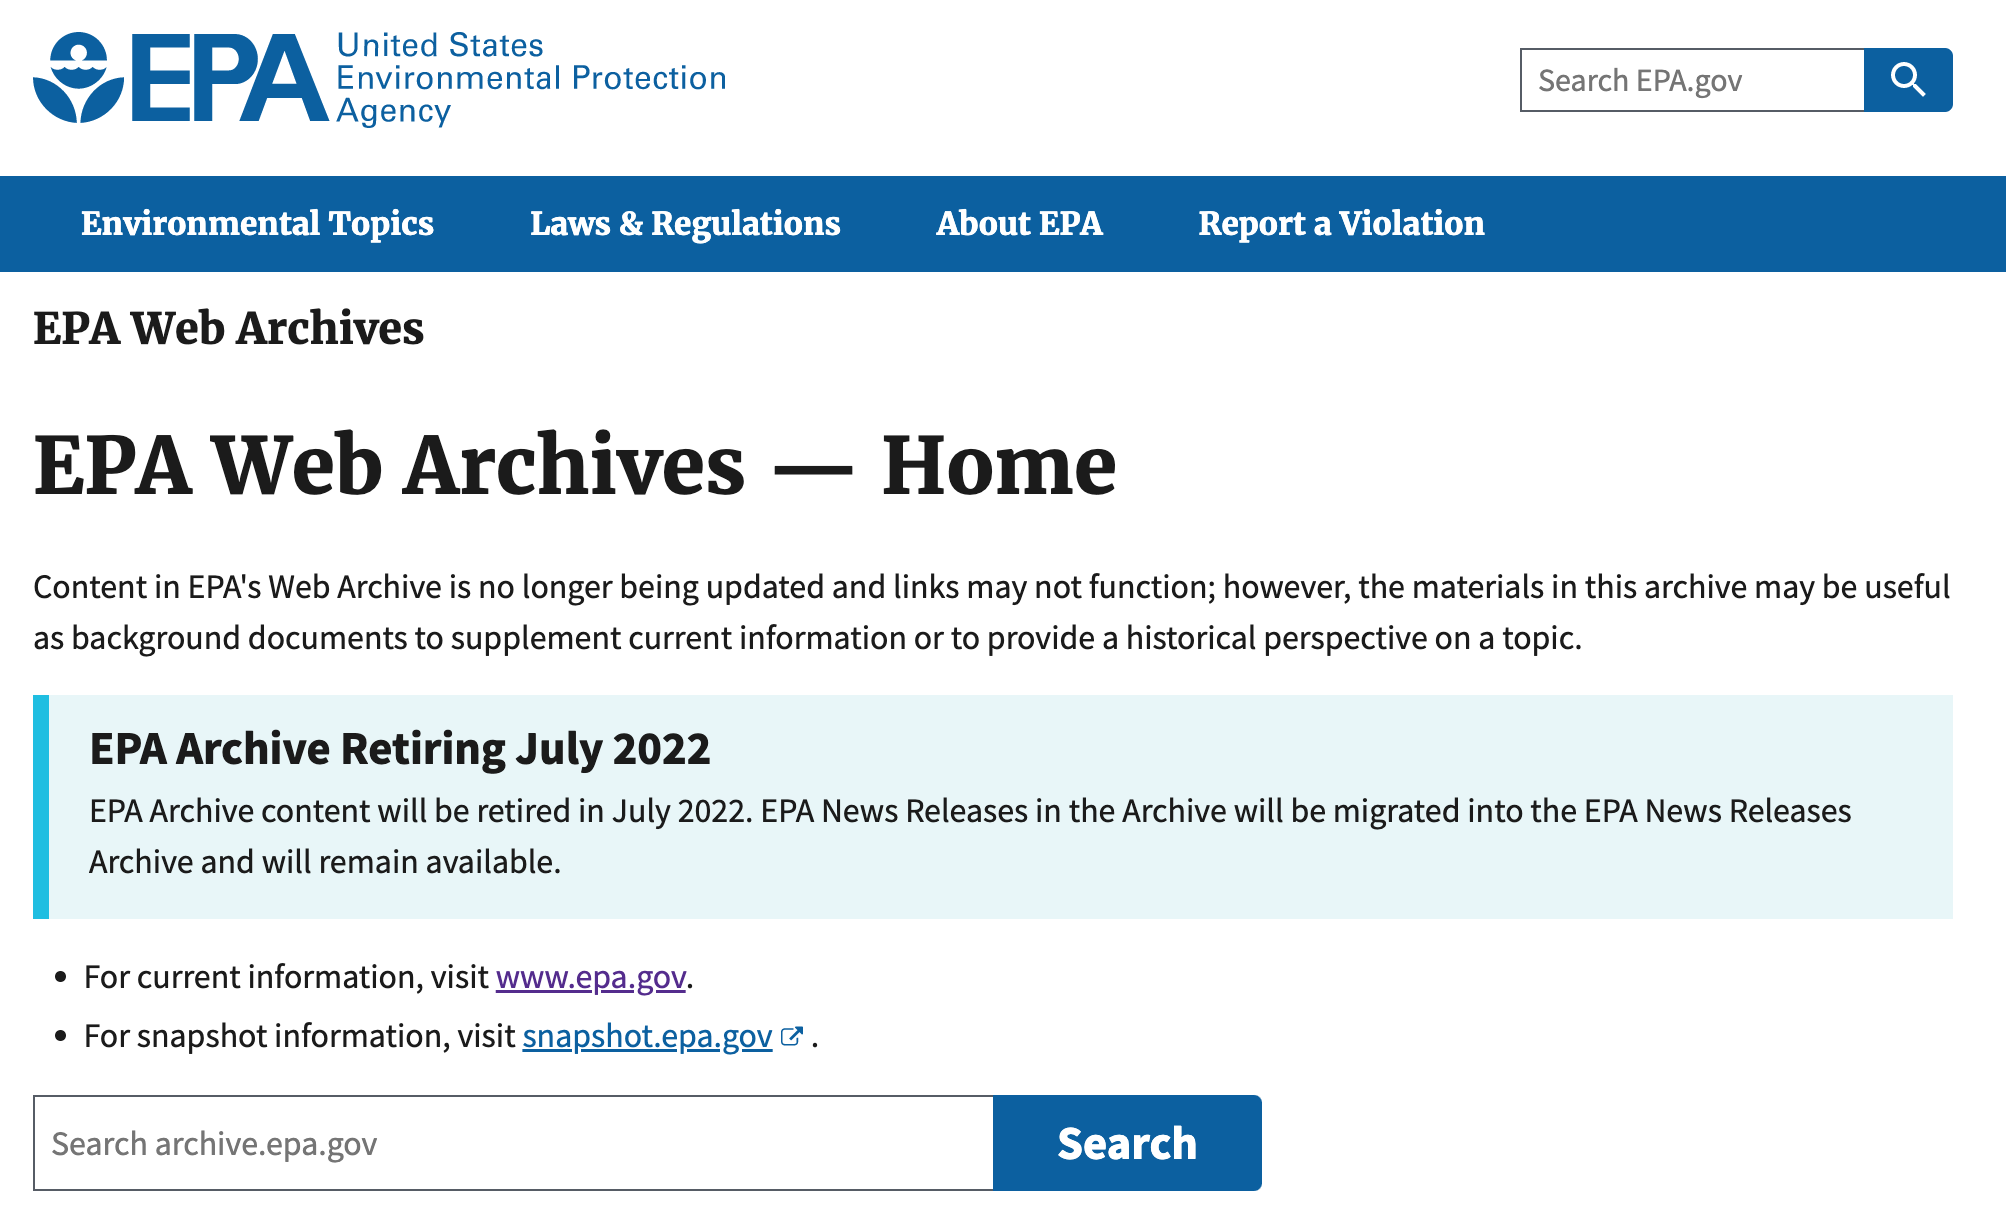 PRESS RELEASE: Open Letter to EPA Asks Agency Not to Sunset its Online Archive